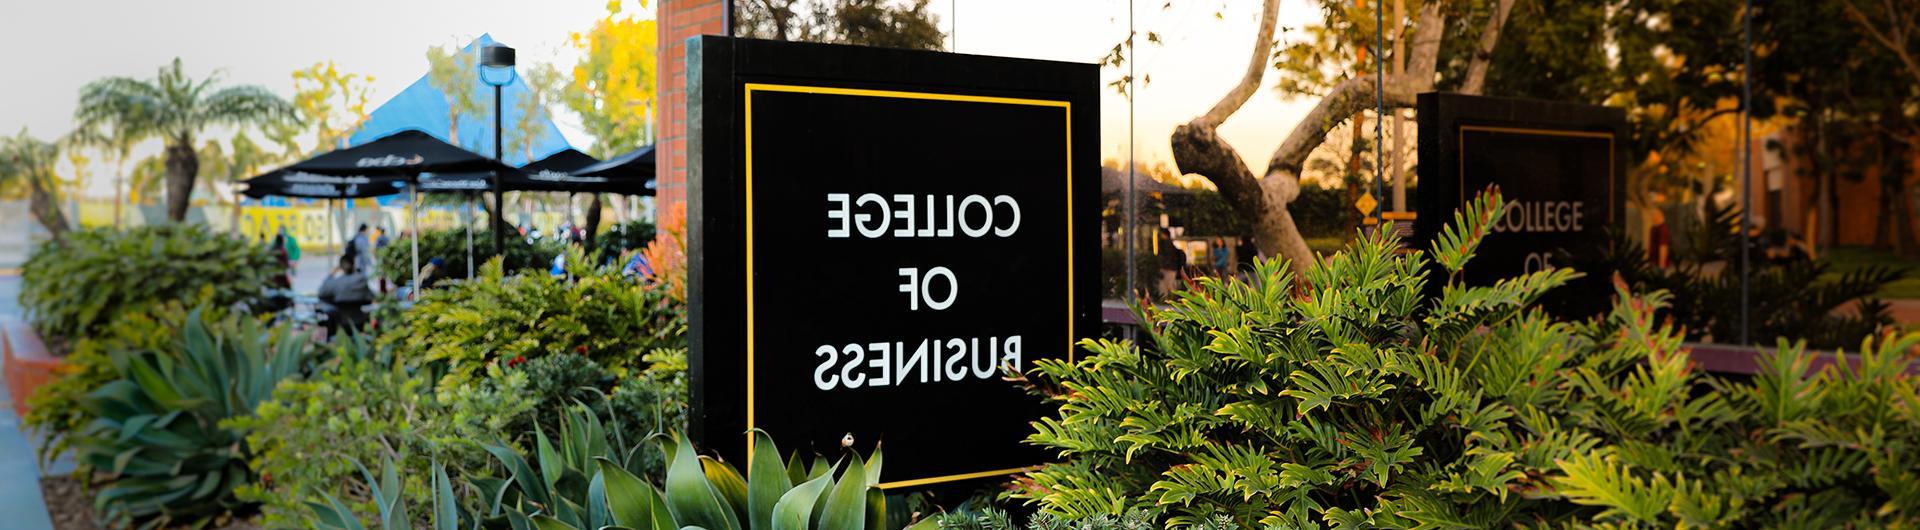 College of Business Offical Banner CSULB